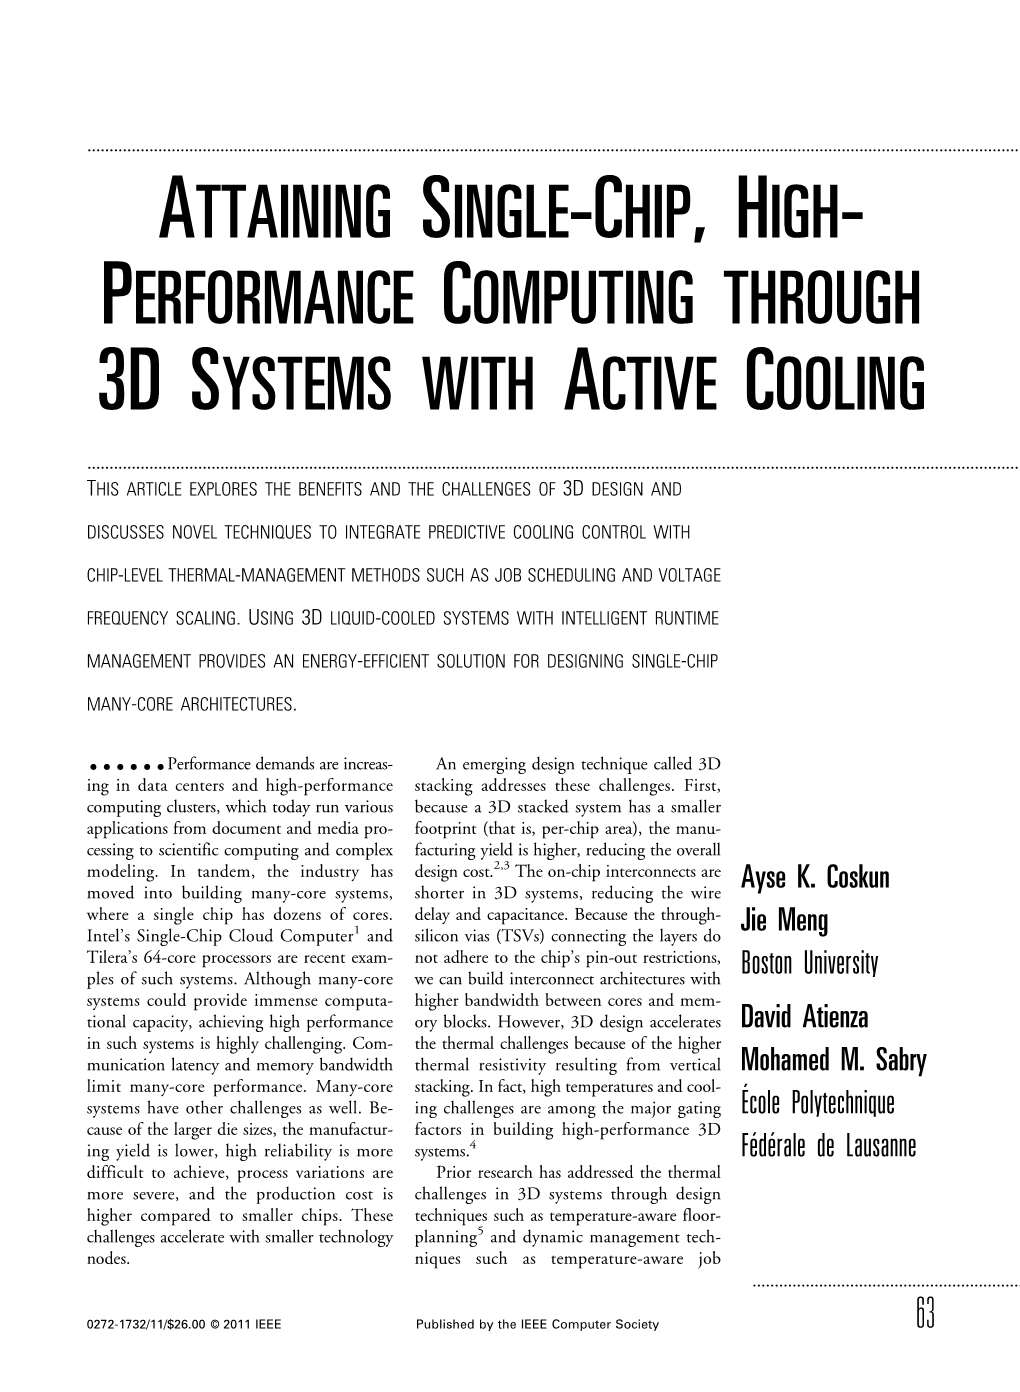 Performance Computing Through 3D Systems with Active Cooling